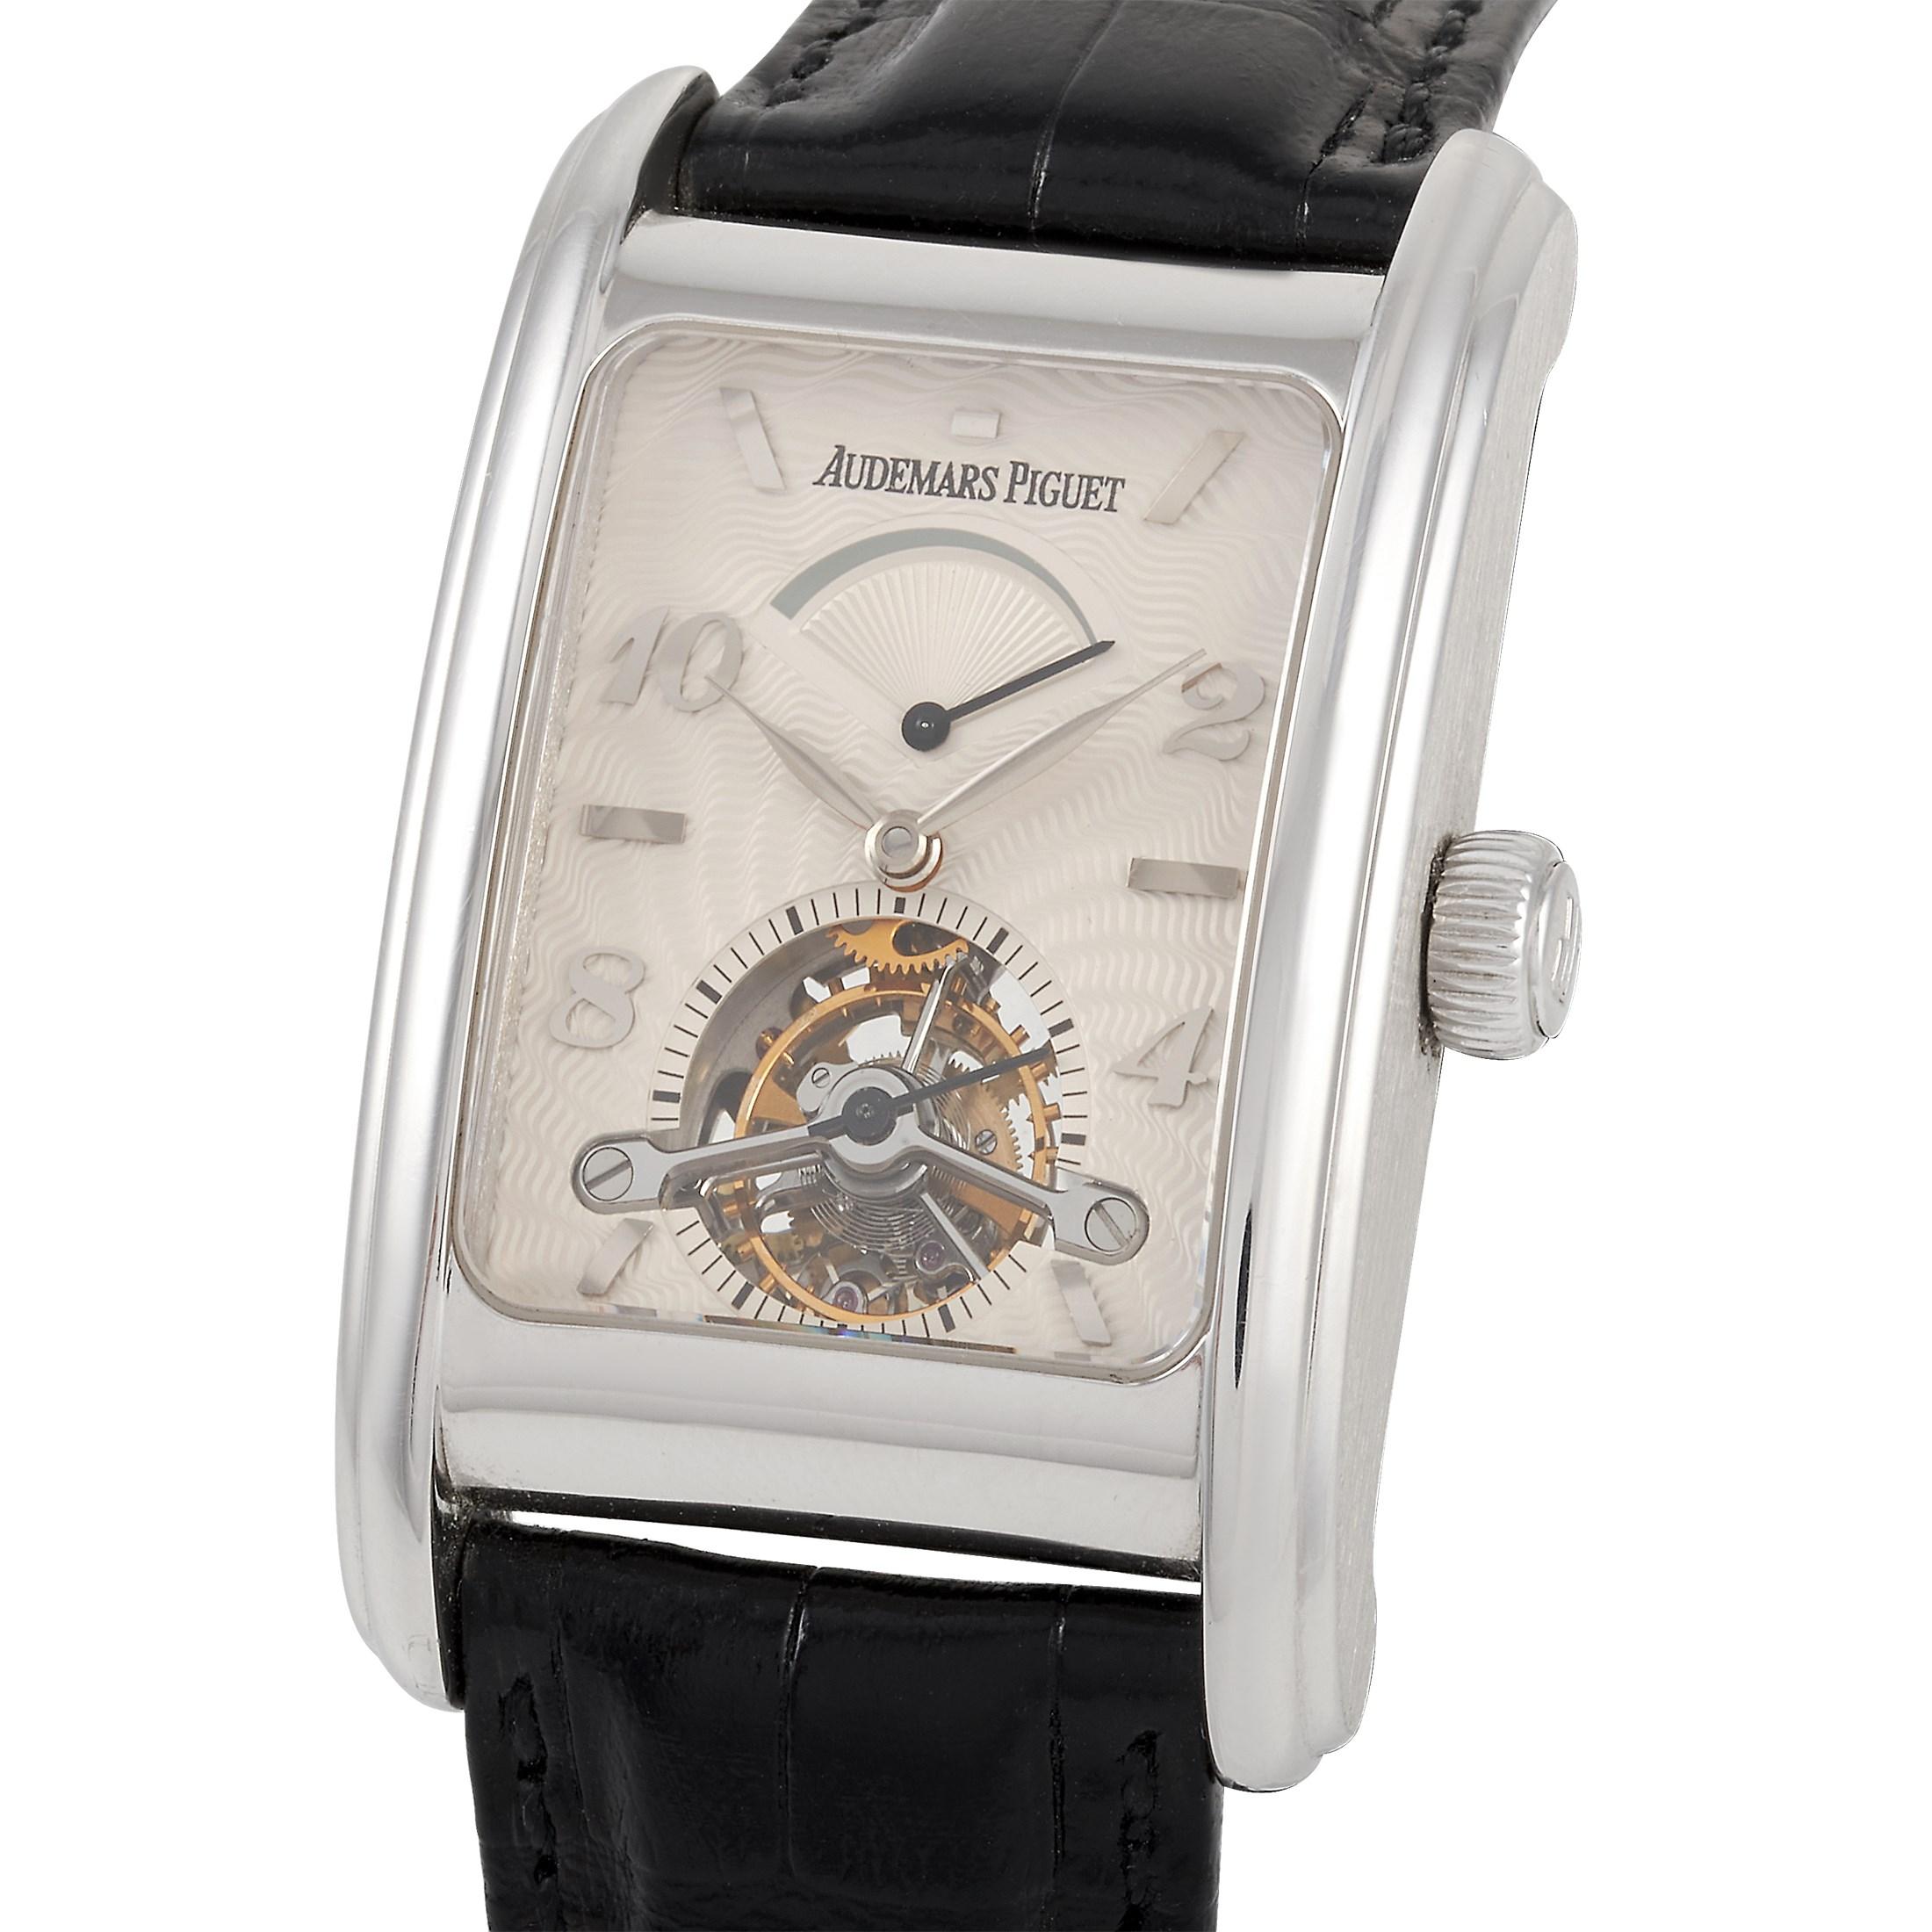 The Audemars Piguet Edward Piguet Tourbillon Watch, reference number 26006BC.OO.D002CR.01, is the definition of classic luxury. Every inch of this beautifully crafted style is undeniably elegant.

The most striking part of this watch is the